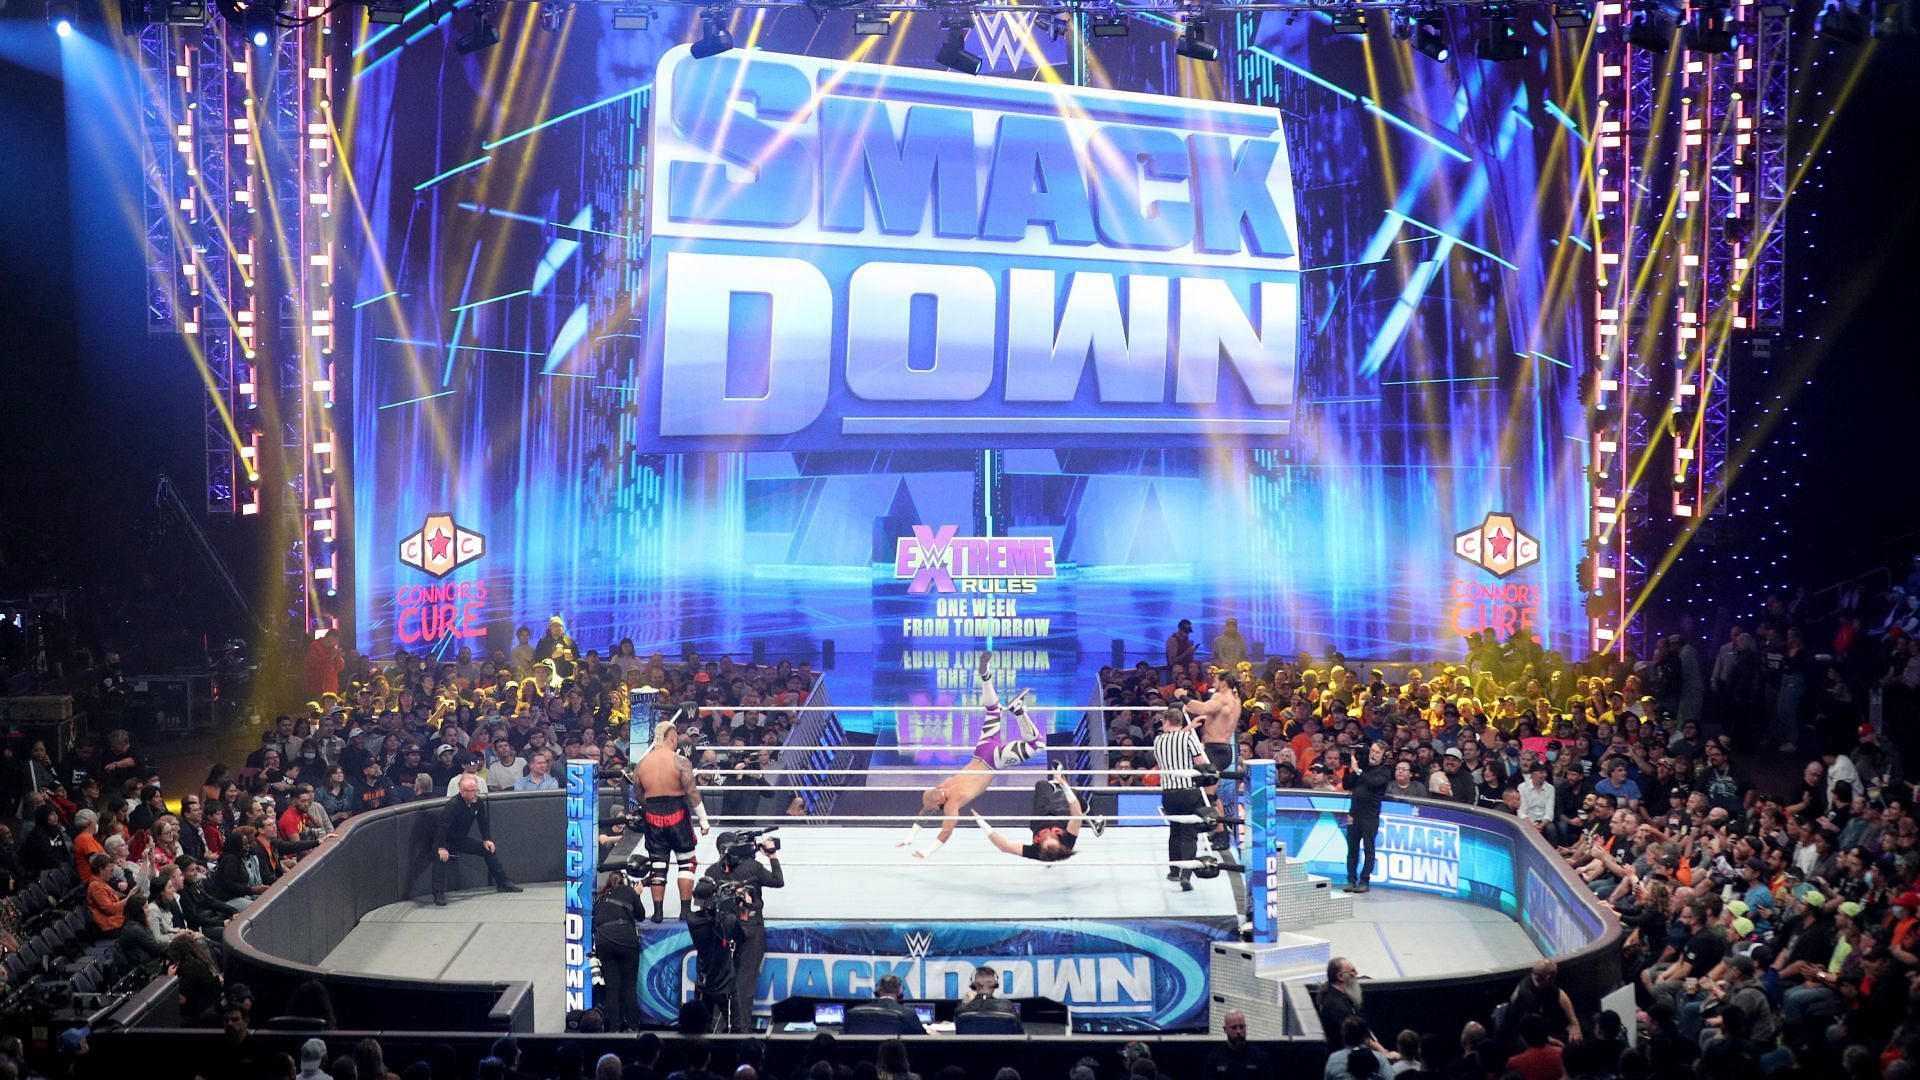 The SmackDown LowDown will air